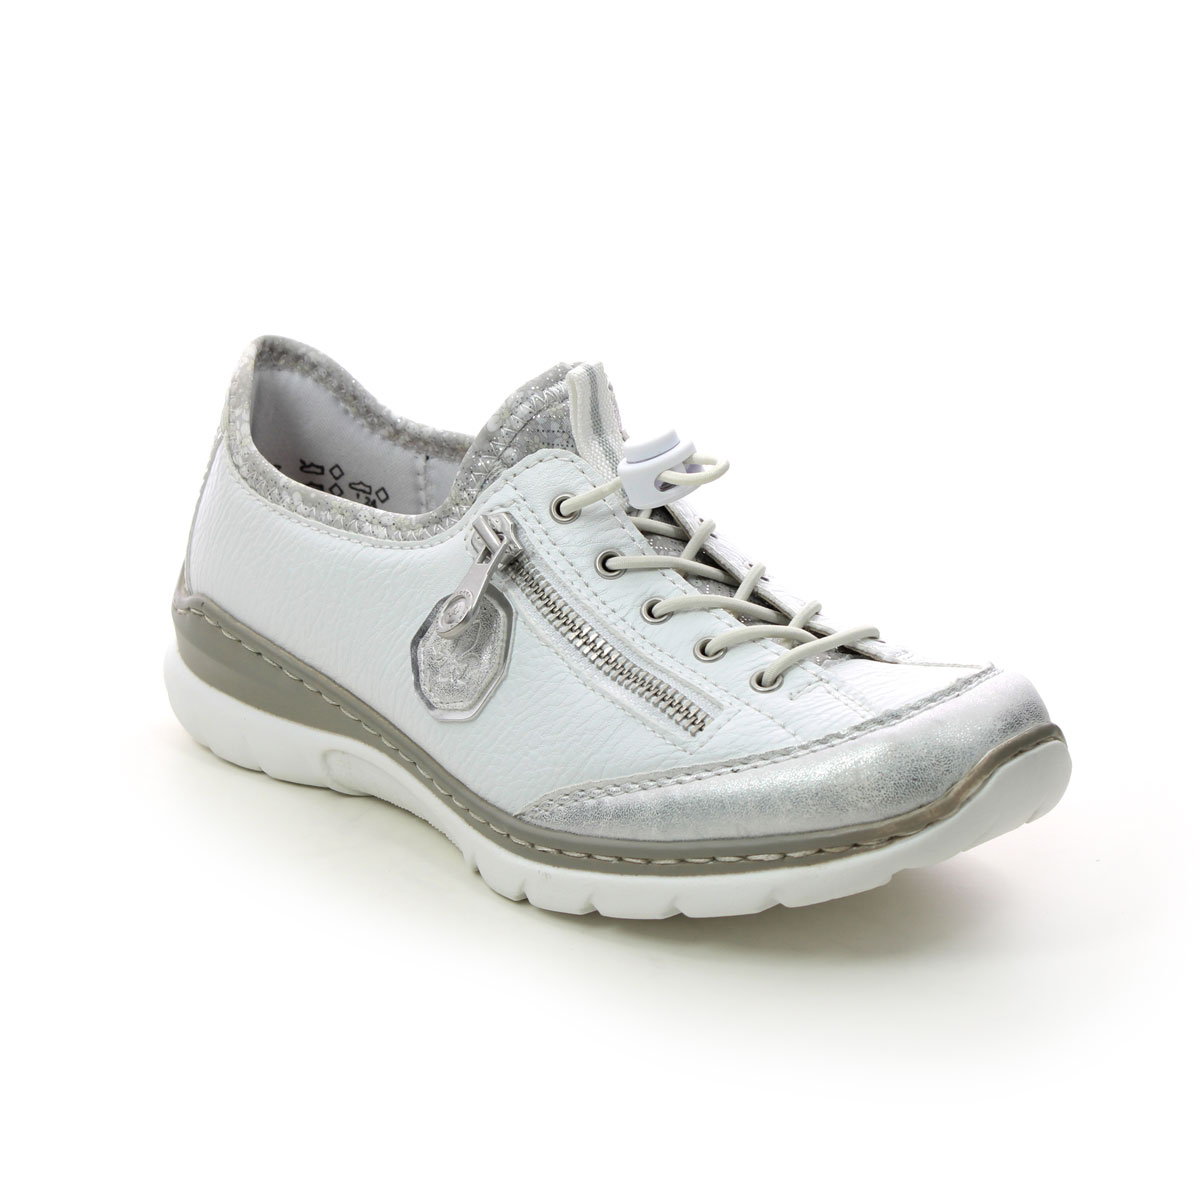 Rieker Memosil White Silver Womens Lacing Shoes L3263-80 In Size 39 In Plain White Silver